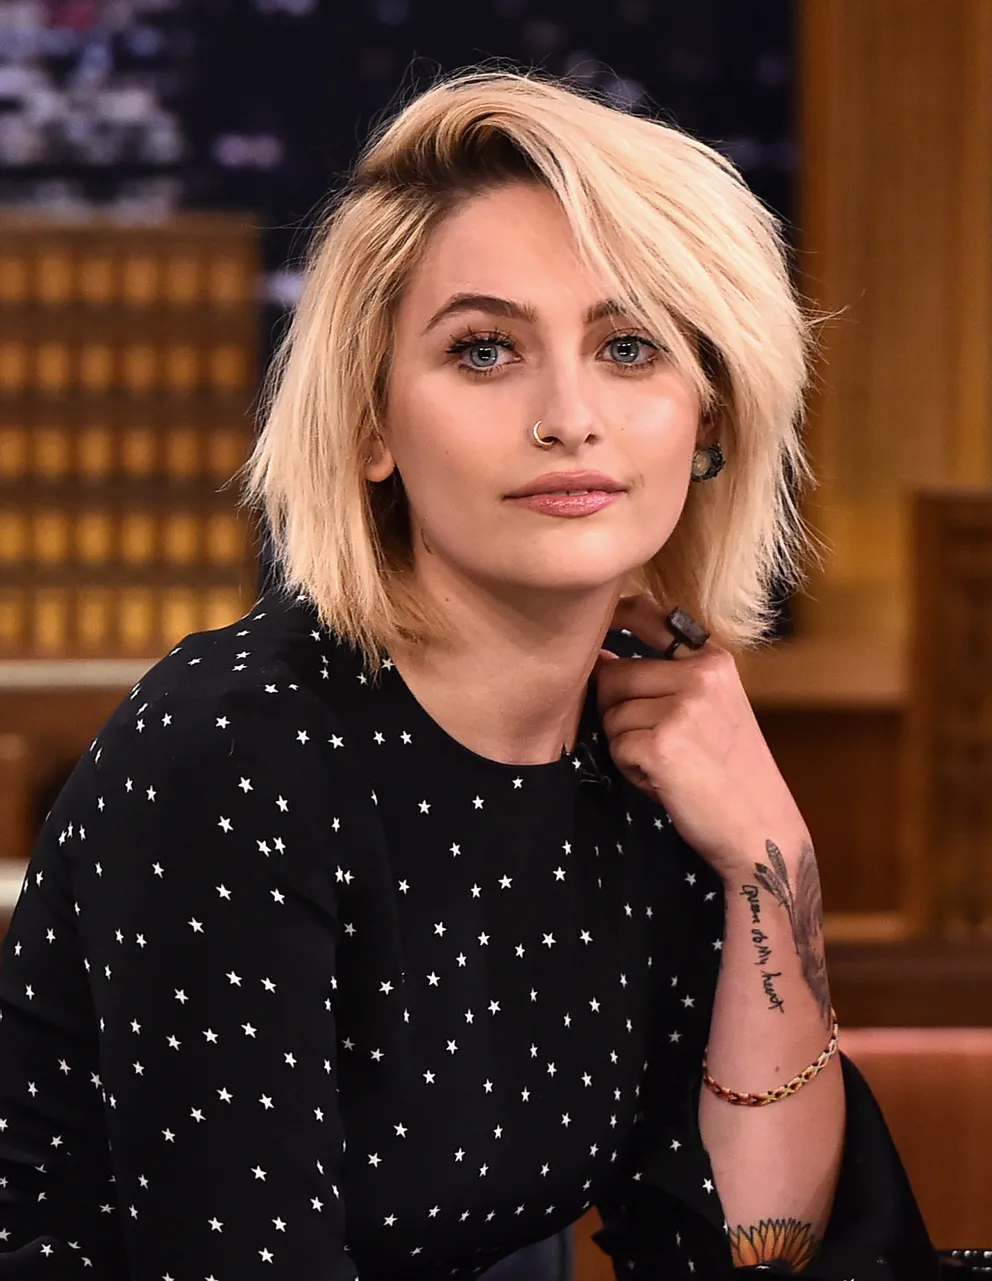 Paris Jackson guesting on "The Late Late Show Starring Jimmy Fallon" in 2017 | Source: Getty Images